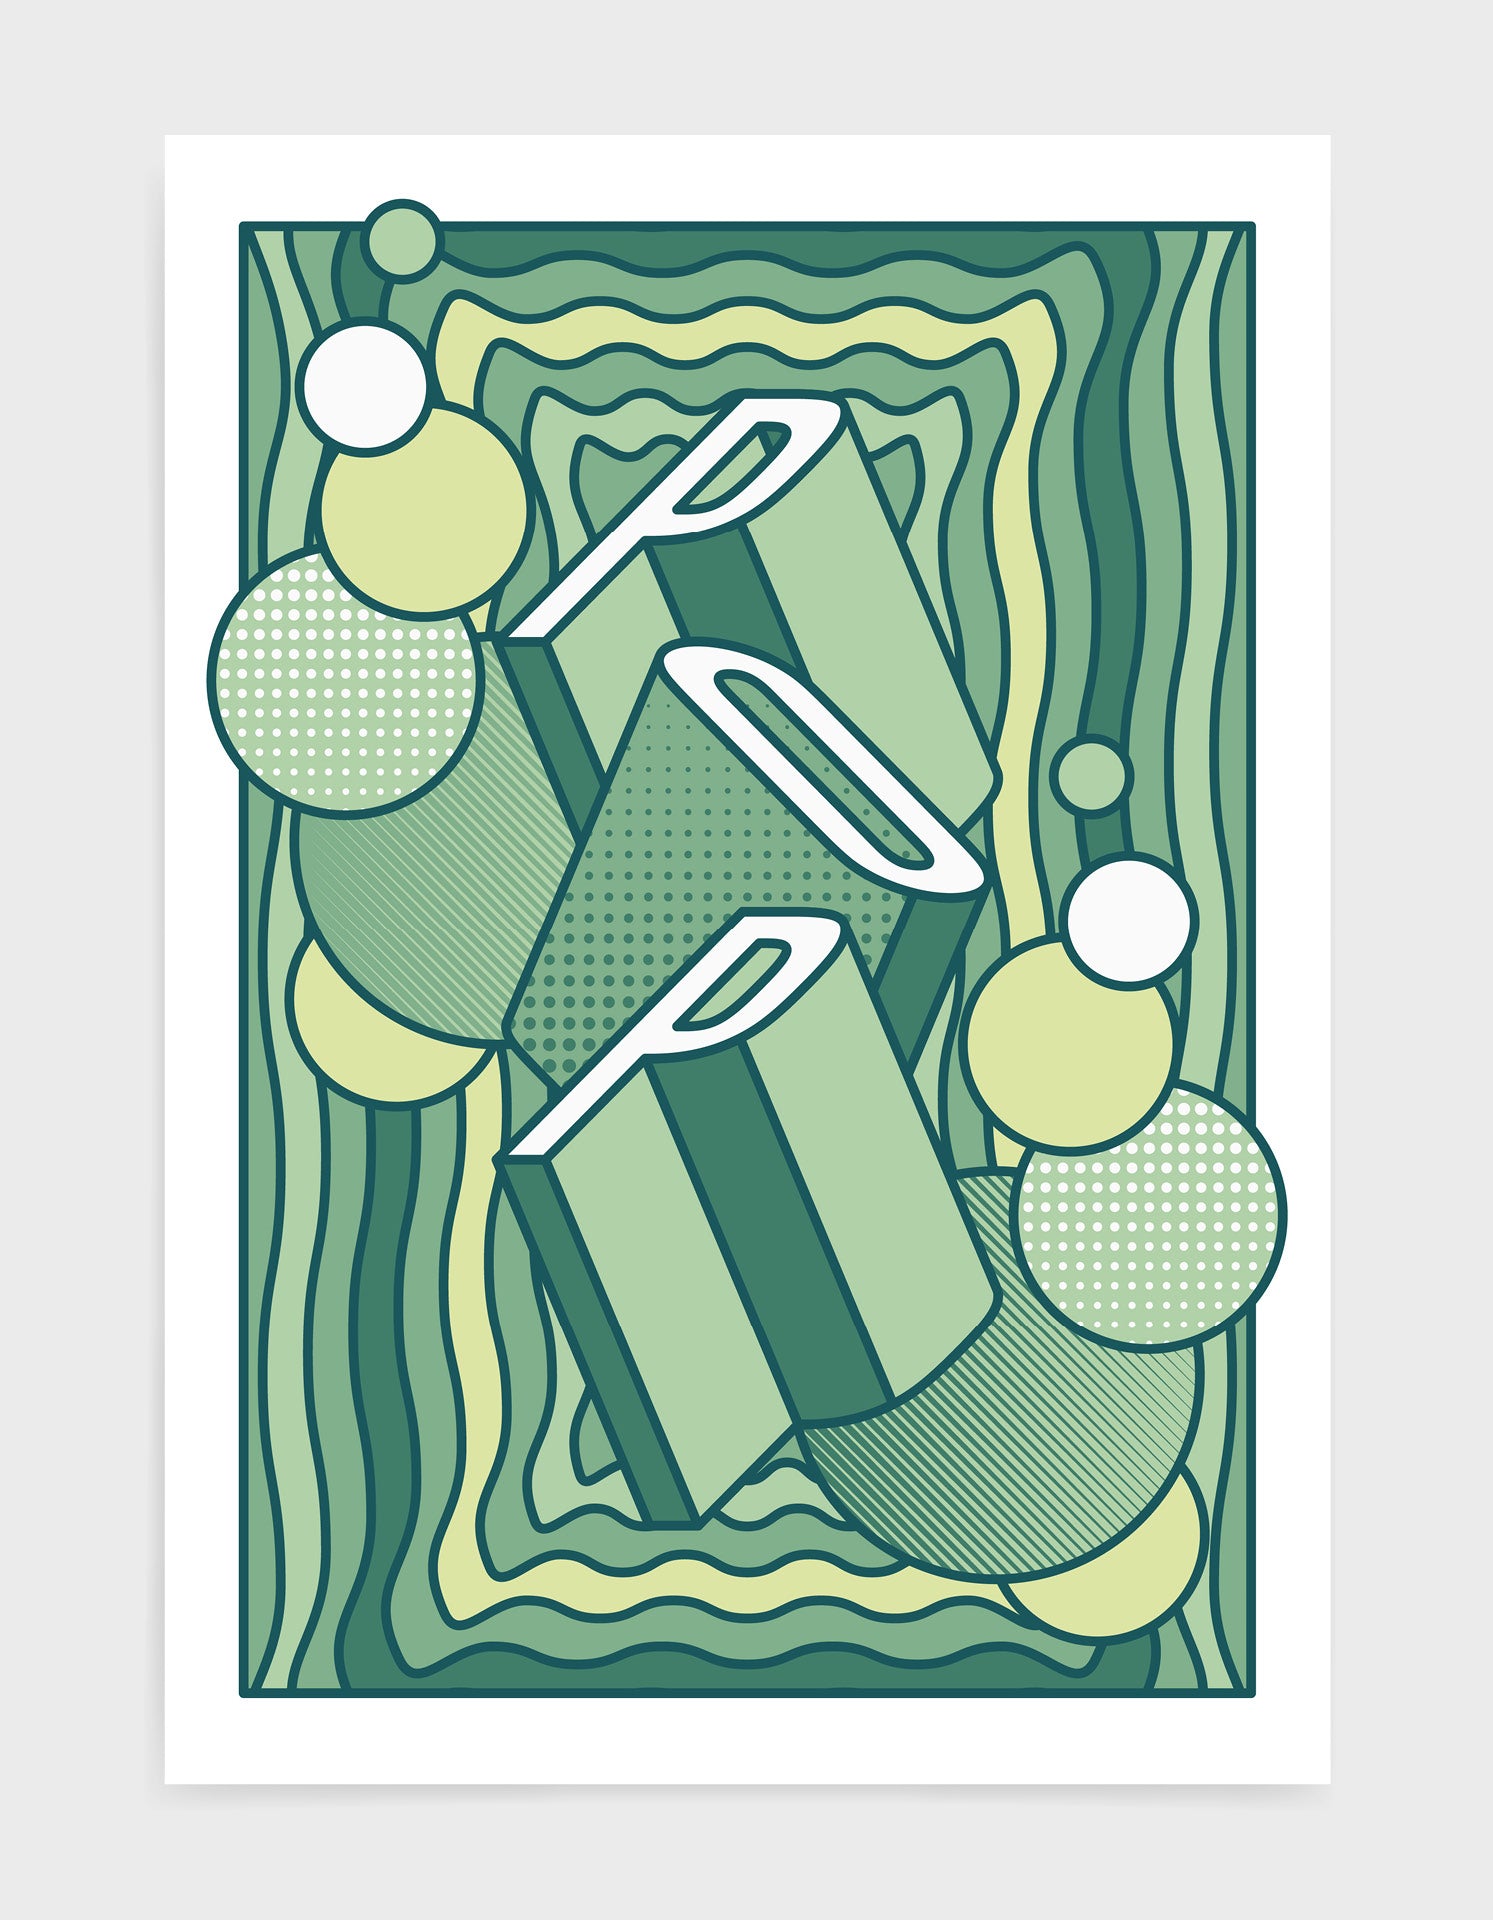 pop music art print featuring a geometric abstract pattern in bold shapes and green tone colours. Block typography depicts the word Pop in tumbling text